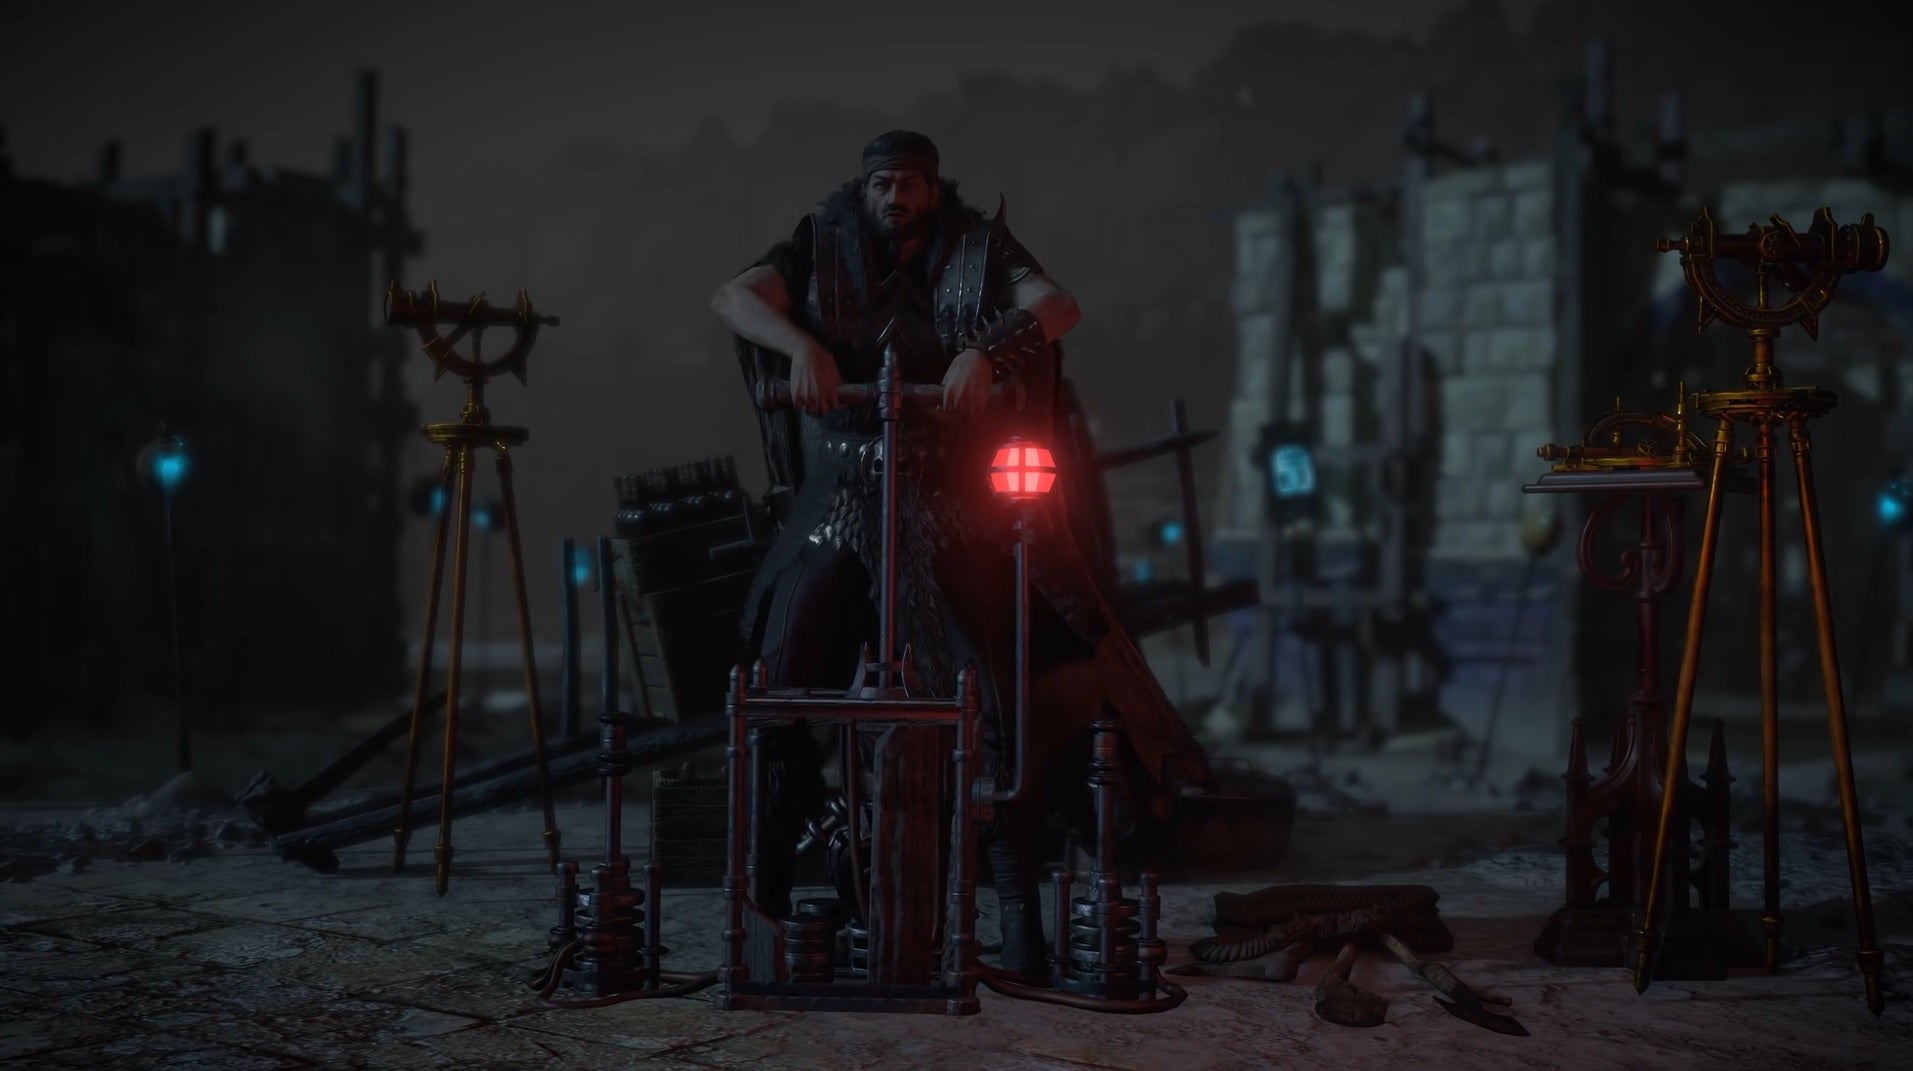 Path Of Exile: Expedition - A player character gets ready to detonate a series of explosives.